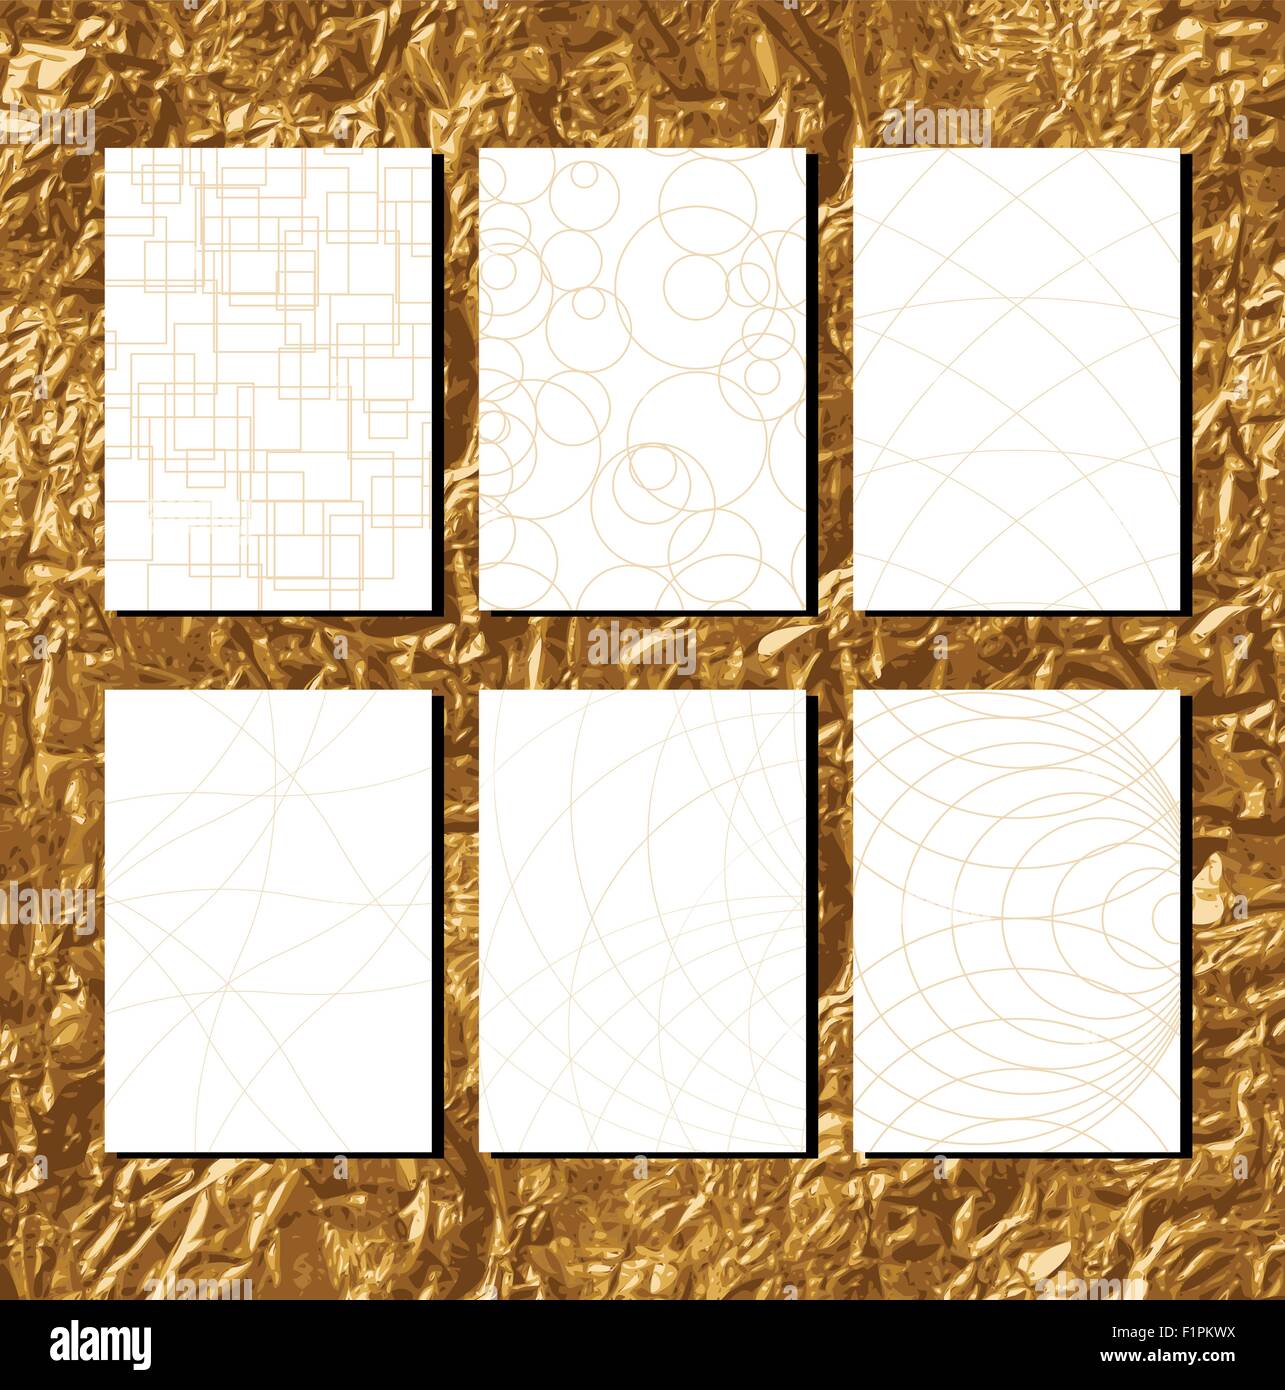 Golden Geometric Patterns with lines for business documents Vector illustration Stock Vector